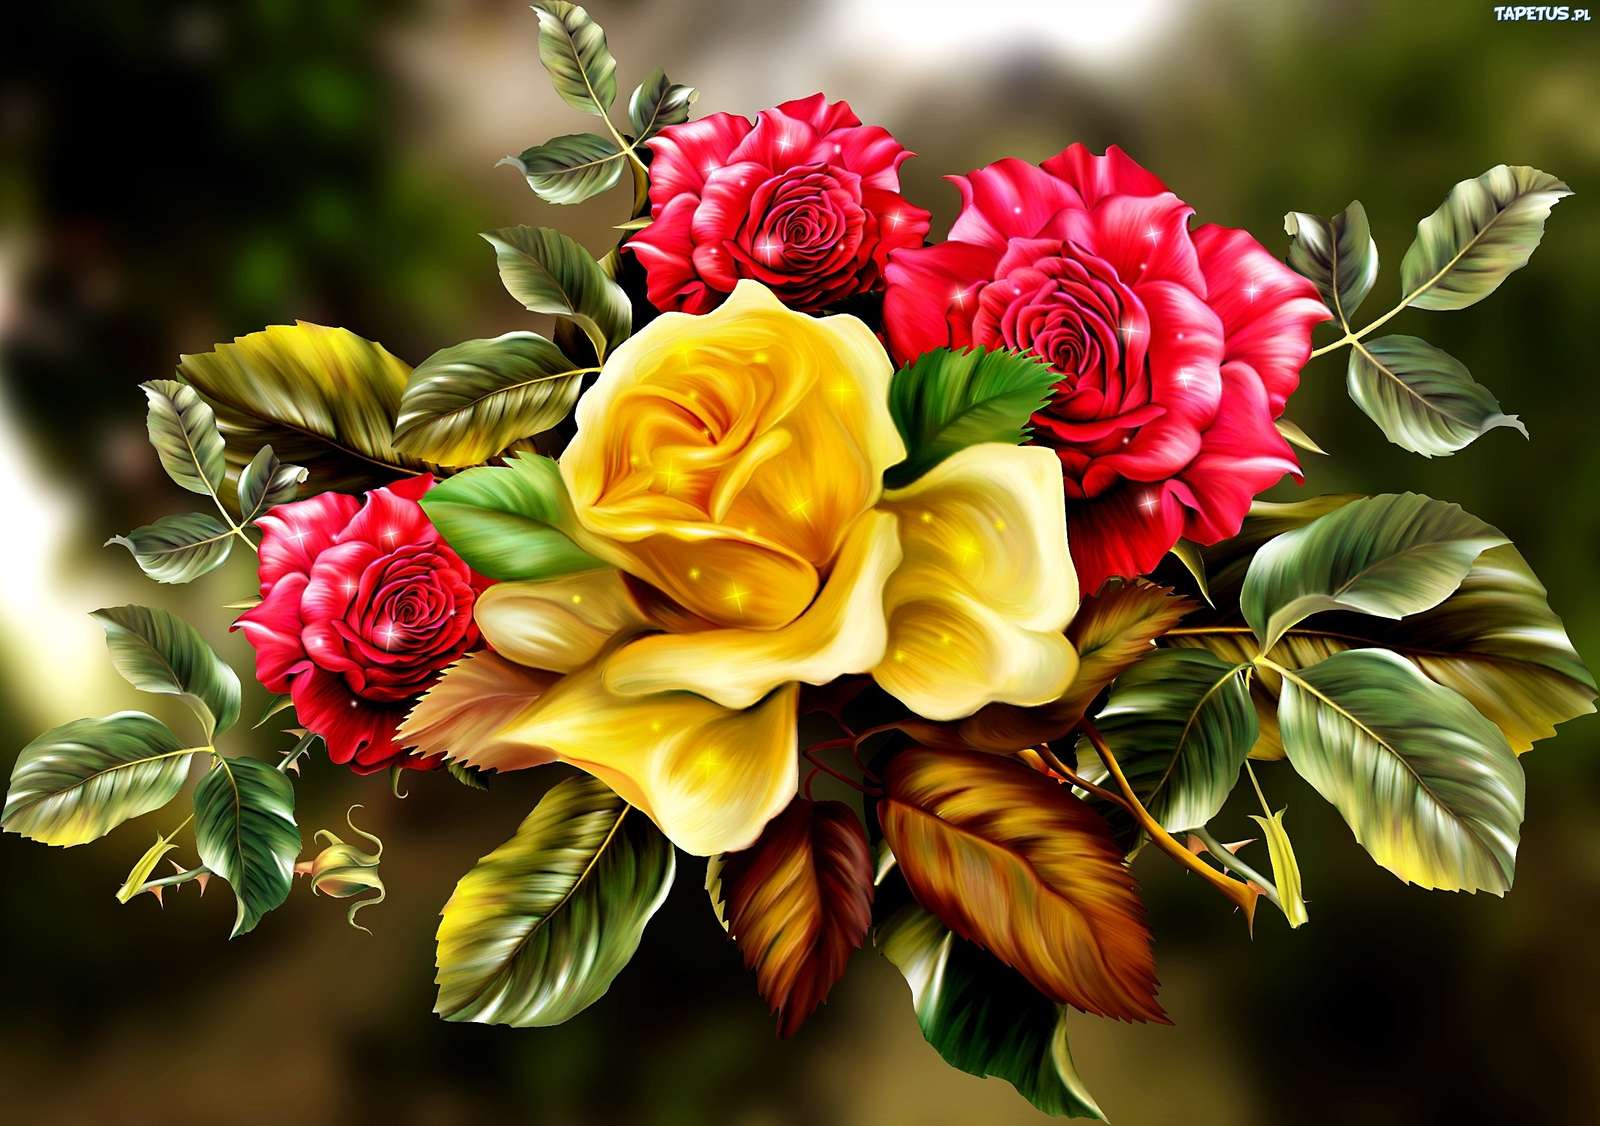 Roses, roses and roses jigsaw puzzle online